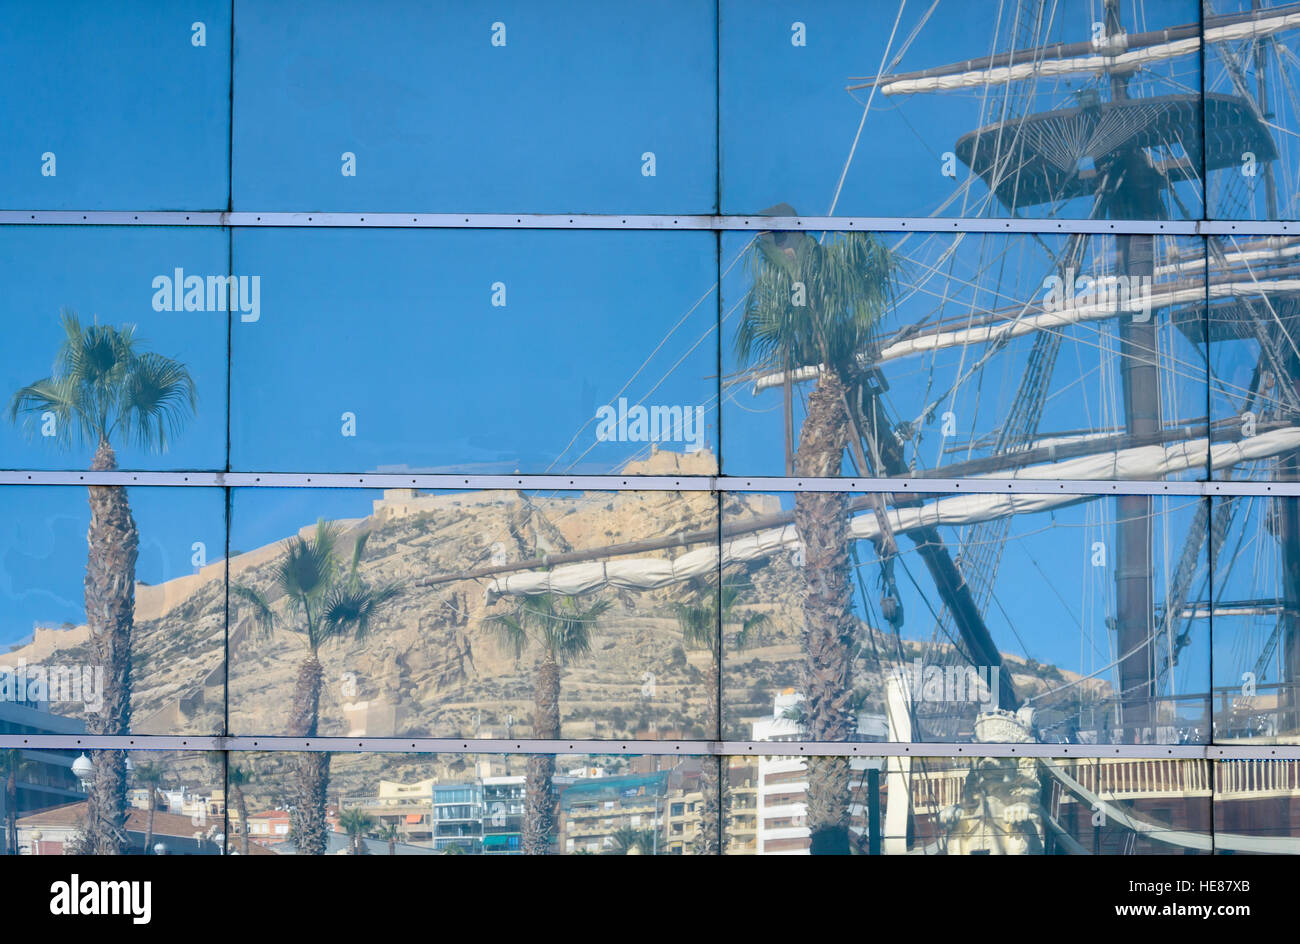 A glass reflect view in the port of Alicante city, Spain. Stock Photo